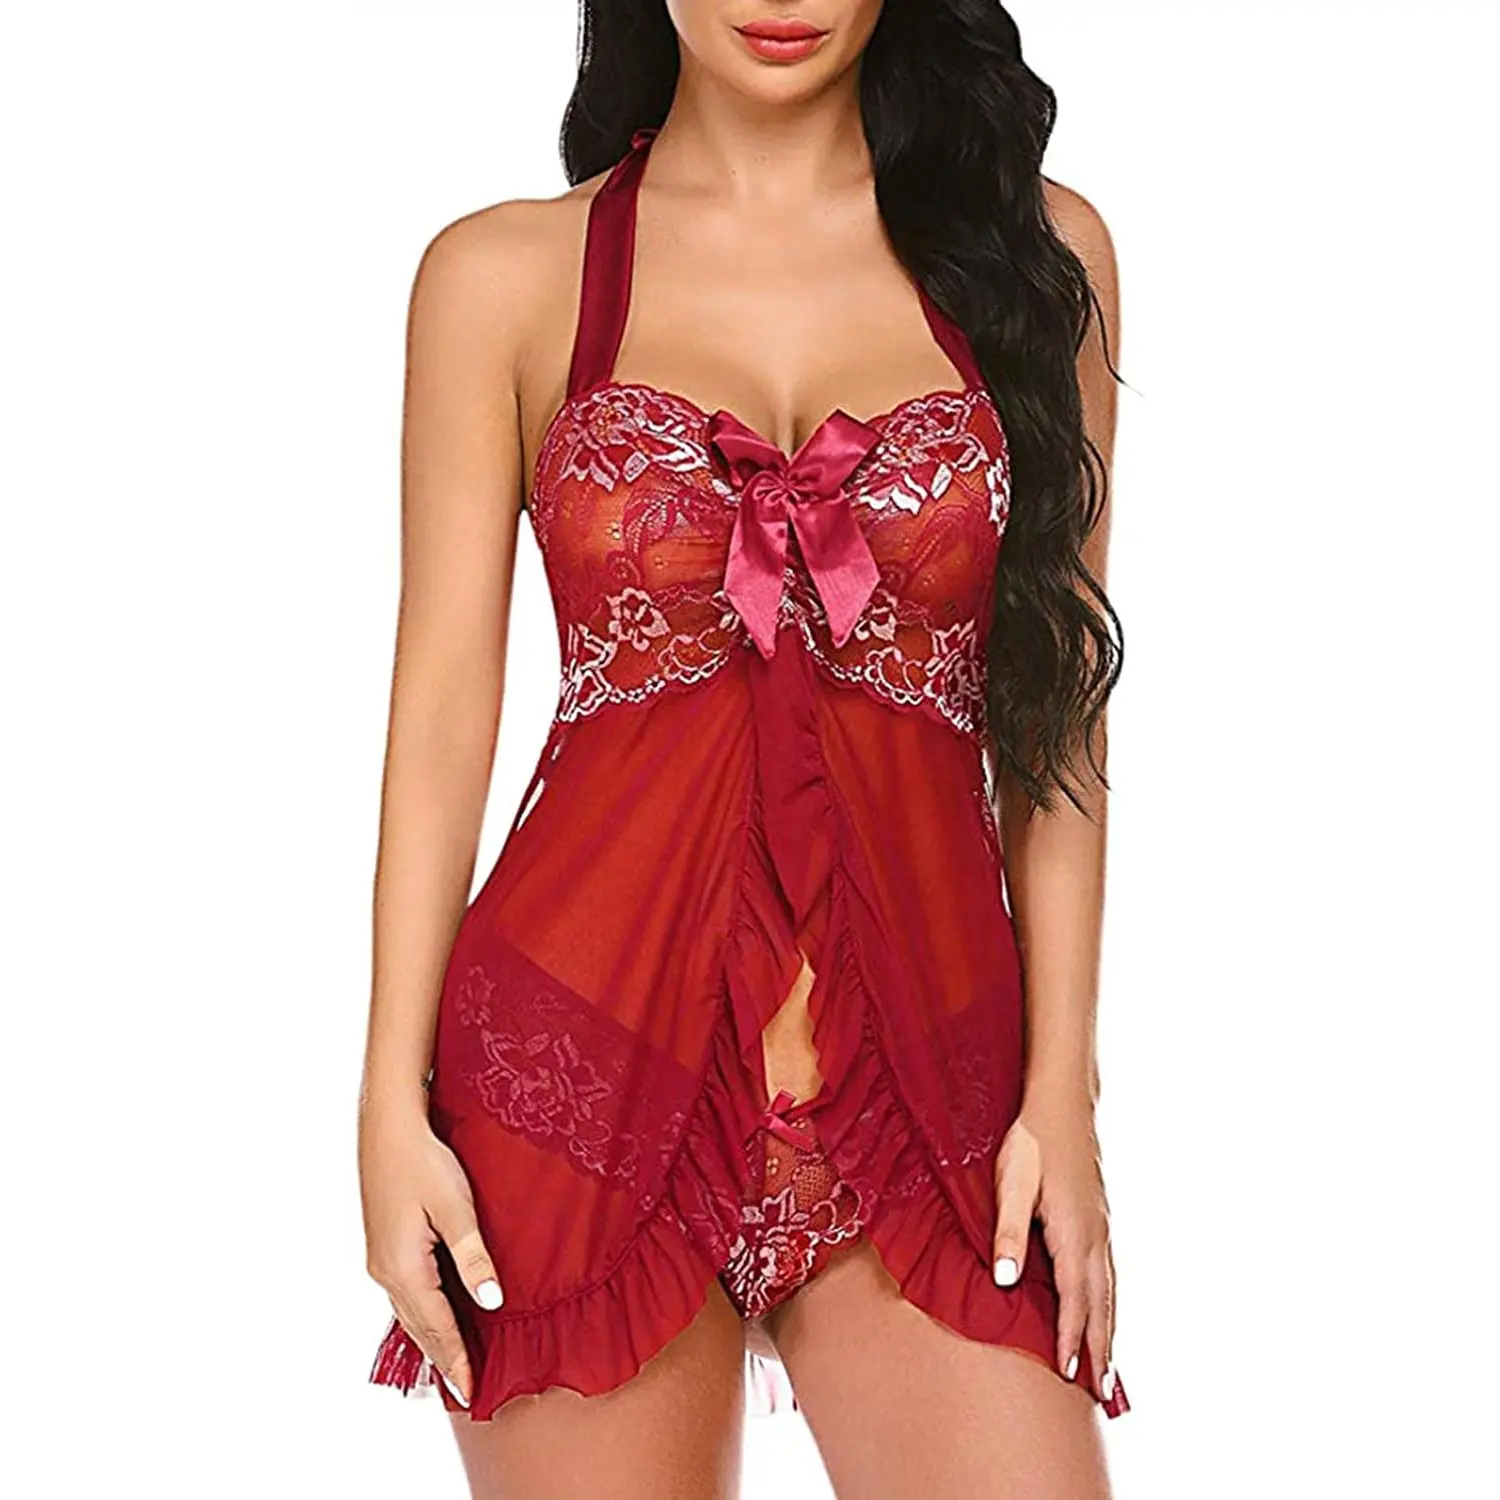 Mesh Babydoll Lingerie Womens Lace Bow Halter Chemises See Through Nightgown Solid Loose Sleepwear